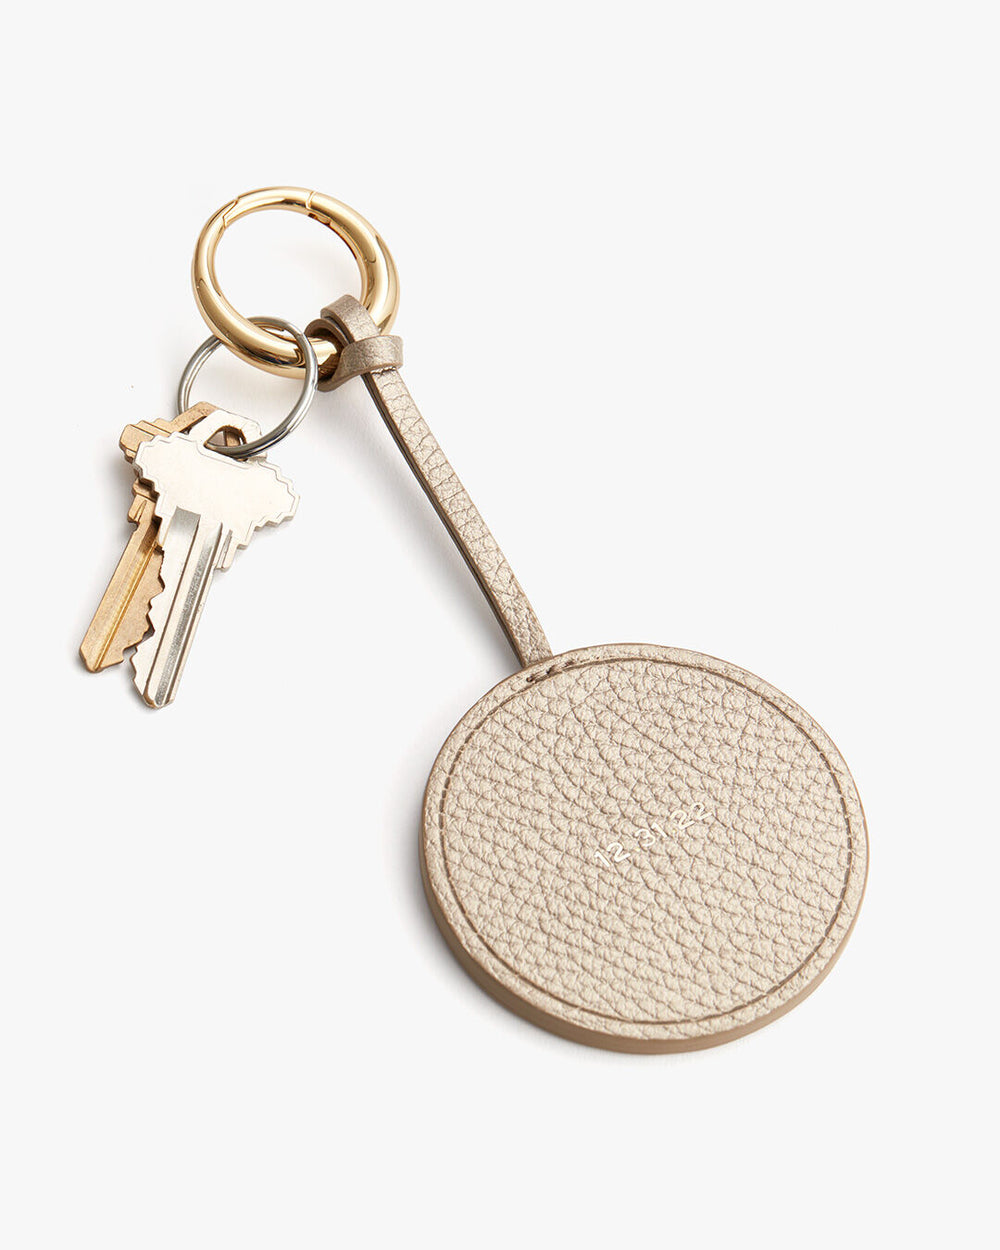 Key on a keyring attached to a circular keychain